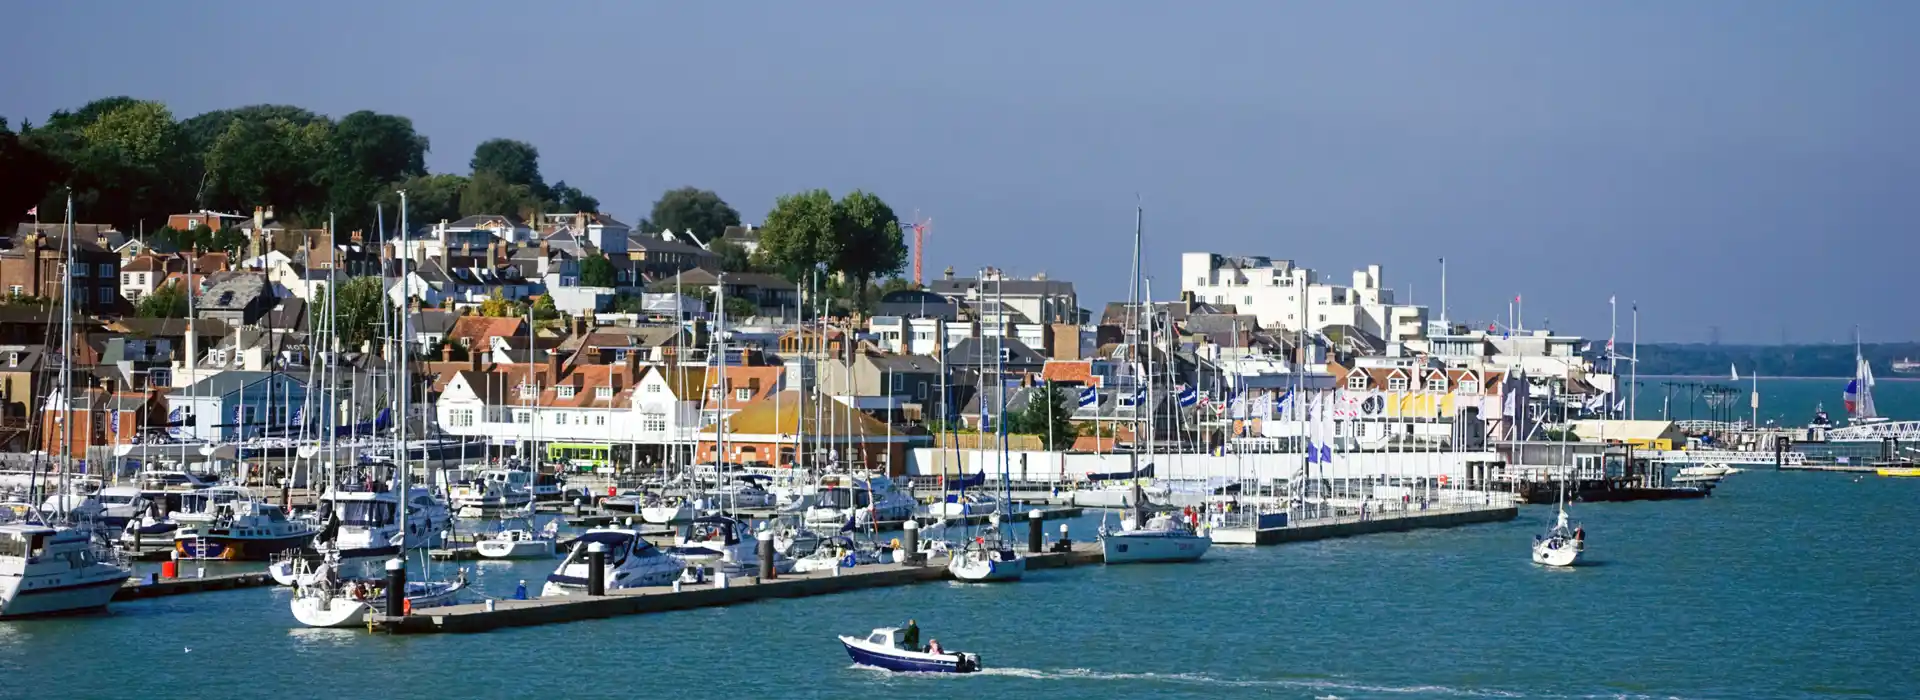 Cowes harbour, Isle of Wight